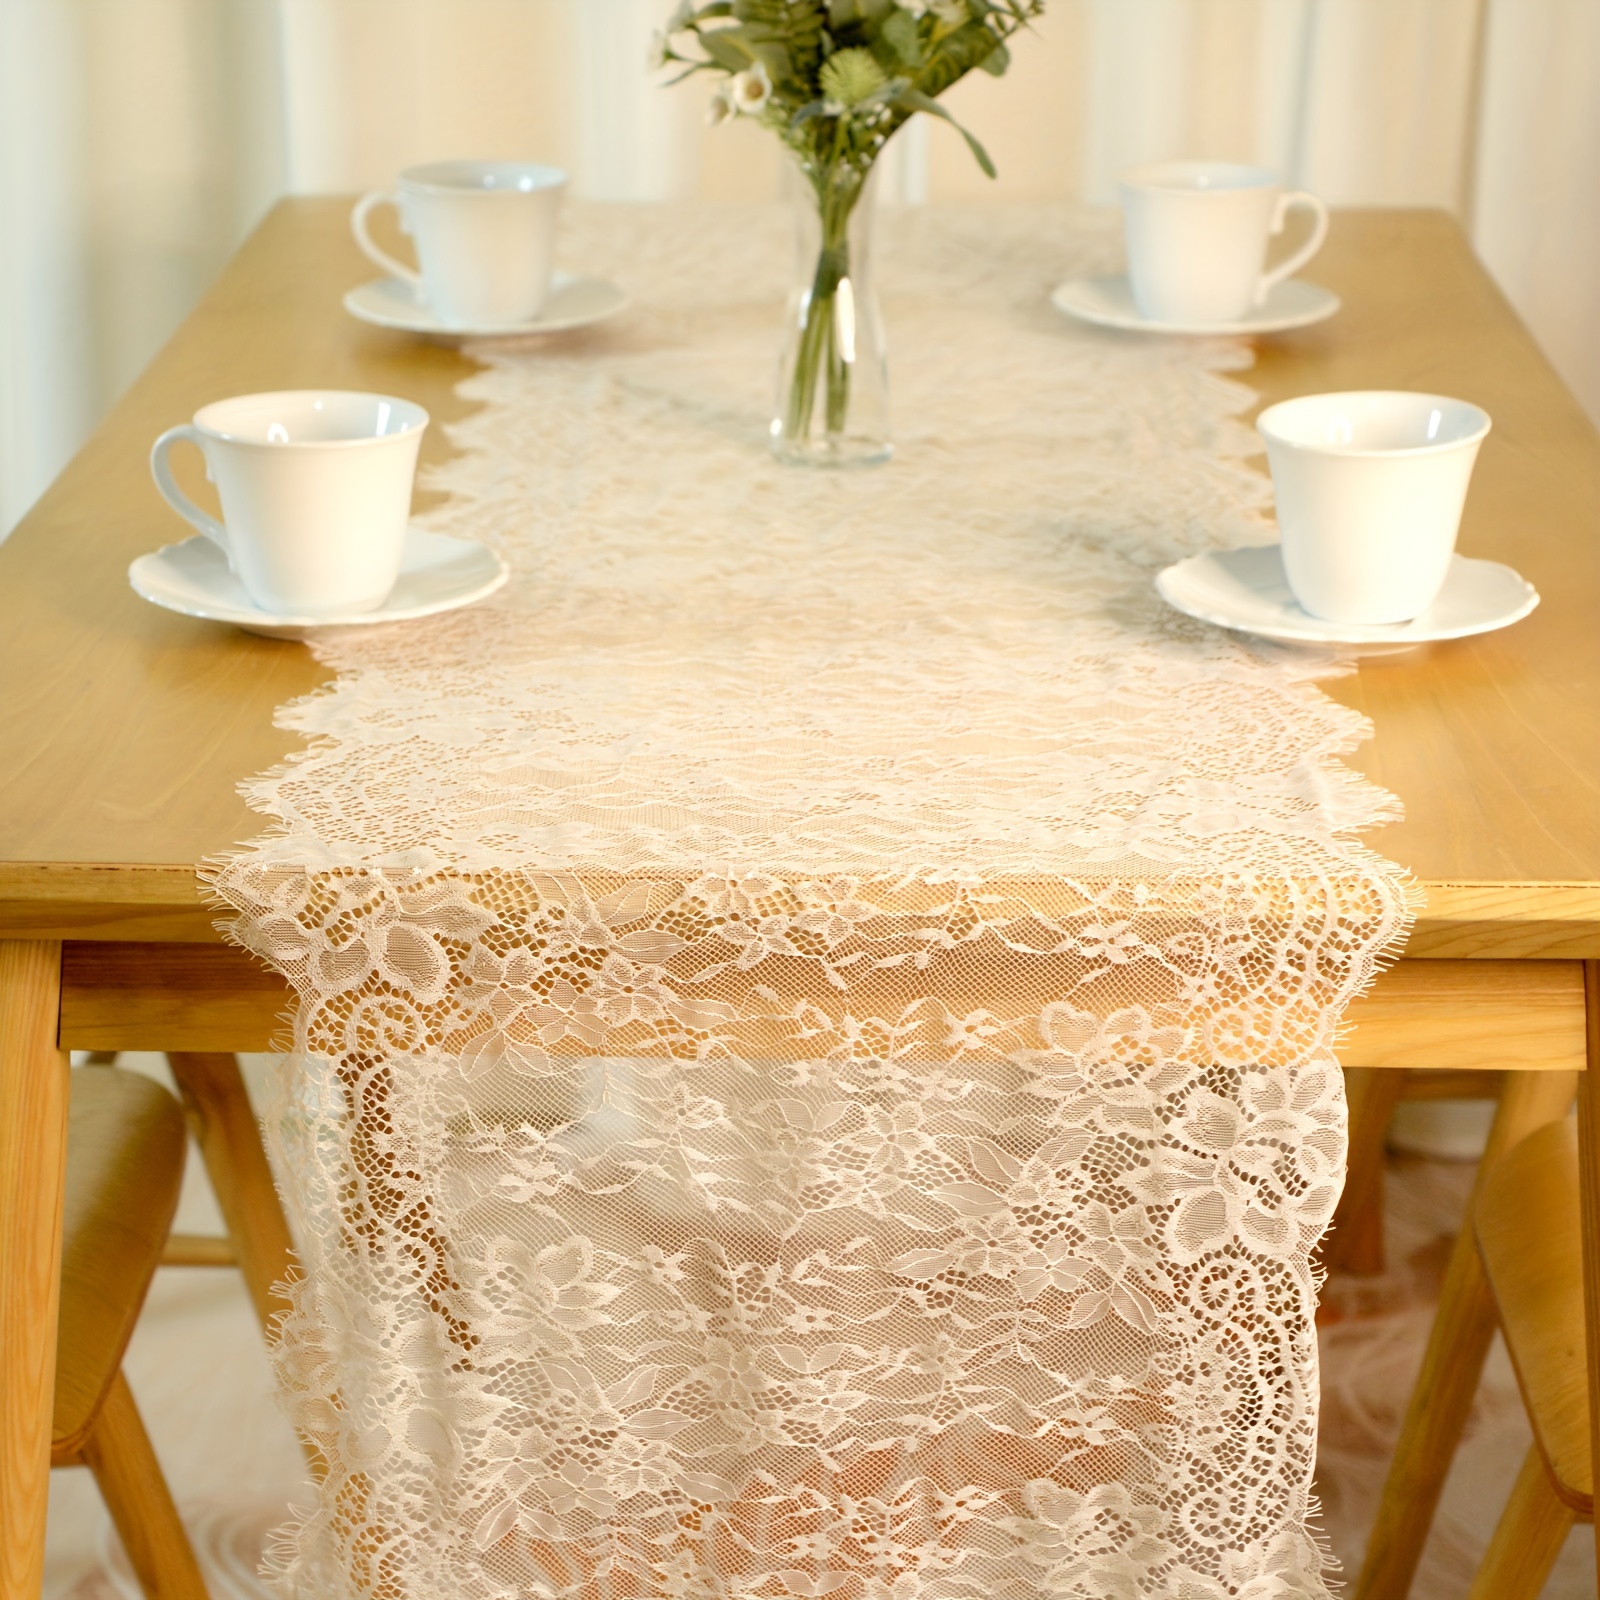 1pc, Vintage Lace Tablecloth, Modern Polyester Fiber Kitchen Table Cover, Rustic Wedding Table Cloth, Farmhouse Party Home Decor, Wedding Party Decoration